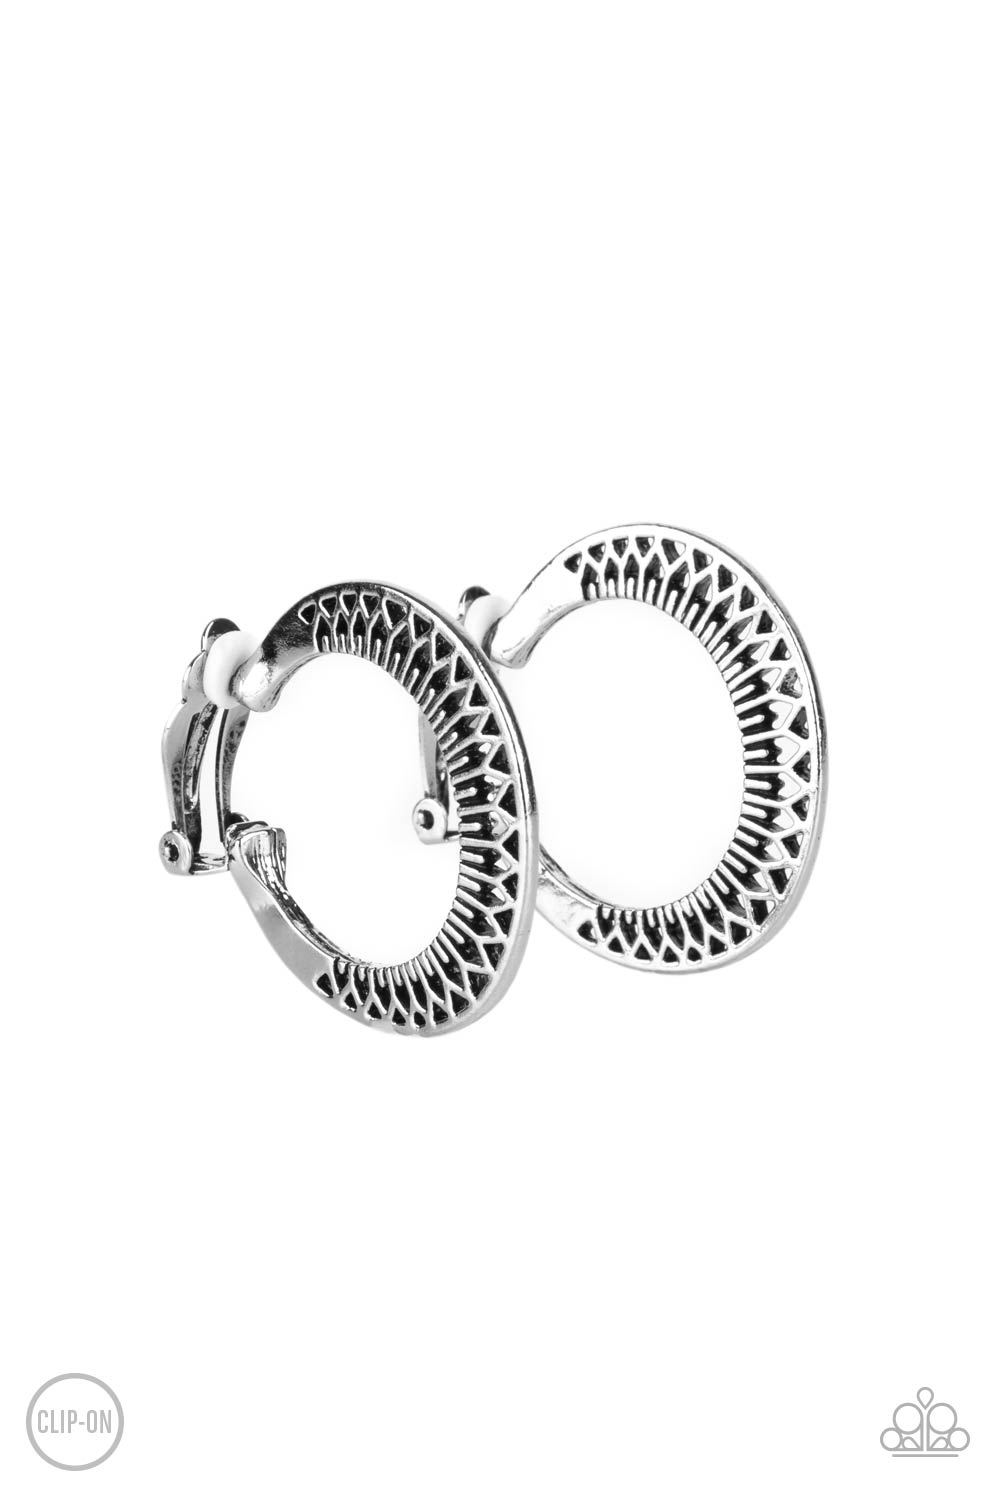 Paparazzi Moon Child Charisma Silver Clip-On Earrings